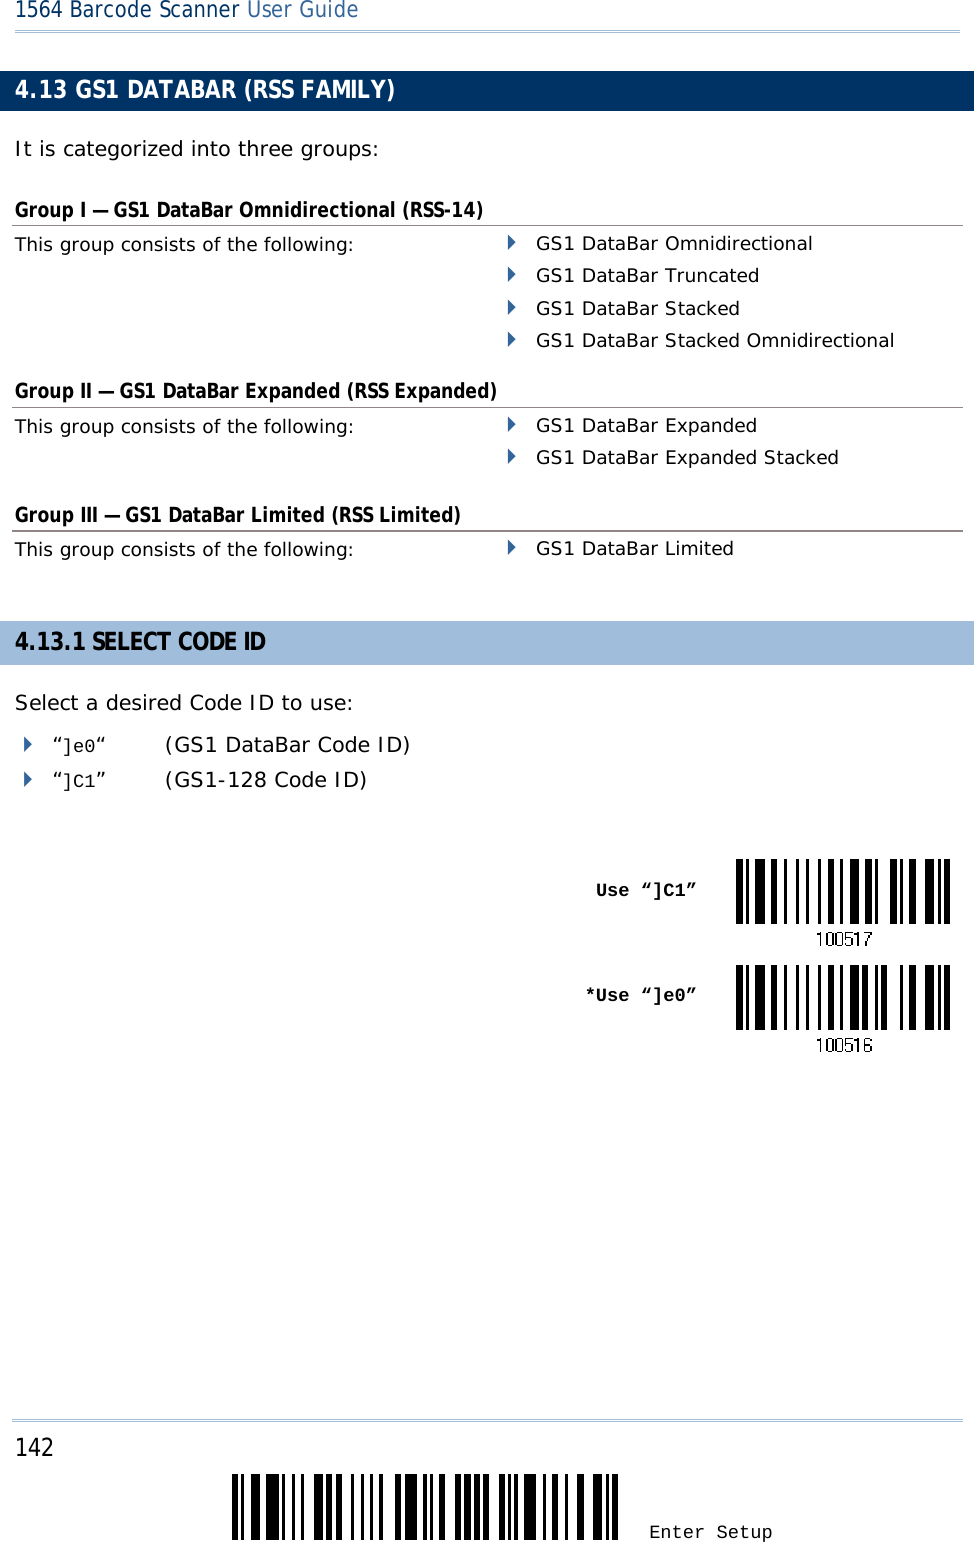 142 Enter Setup 1564 Barcode Scanner User Guide  4.13 GS1 DATABAR (RSS FAMILY) It is categorized into three groups: Group I — GS1 DataBar Omnidirectional (RSS-14) This group consists of the following:    GS1 DataBar Omnidirectional  GS1 DataBar Truncated   GS1 DataBar Stacked  GS1 DataBar Stacked Omnidirectional Group II — GS1 DataBar Expanded (RSS Expanded) This group consists of the following:    GS1 DataBar Expanded  GS1 DataBar Expanded Stacked Group III — GS1 DataBar Limited (RSS Limited) This group consists of the following:    GS1 DataBar Limited 4.13.1 SELECT CODE ID Select a desired Code ID to use:  “]e0“  (GS1 DataBar Code ID)  “]C1” (GS1-128 Code ID)   Use “]C1” *Use “]e0”      